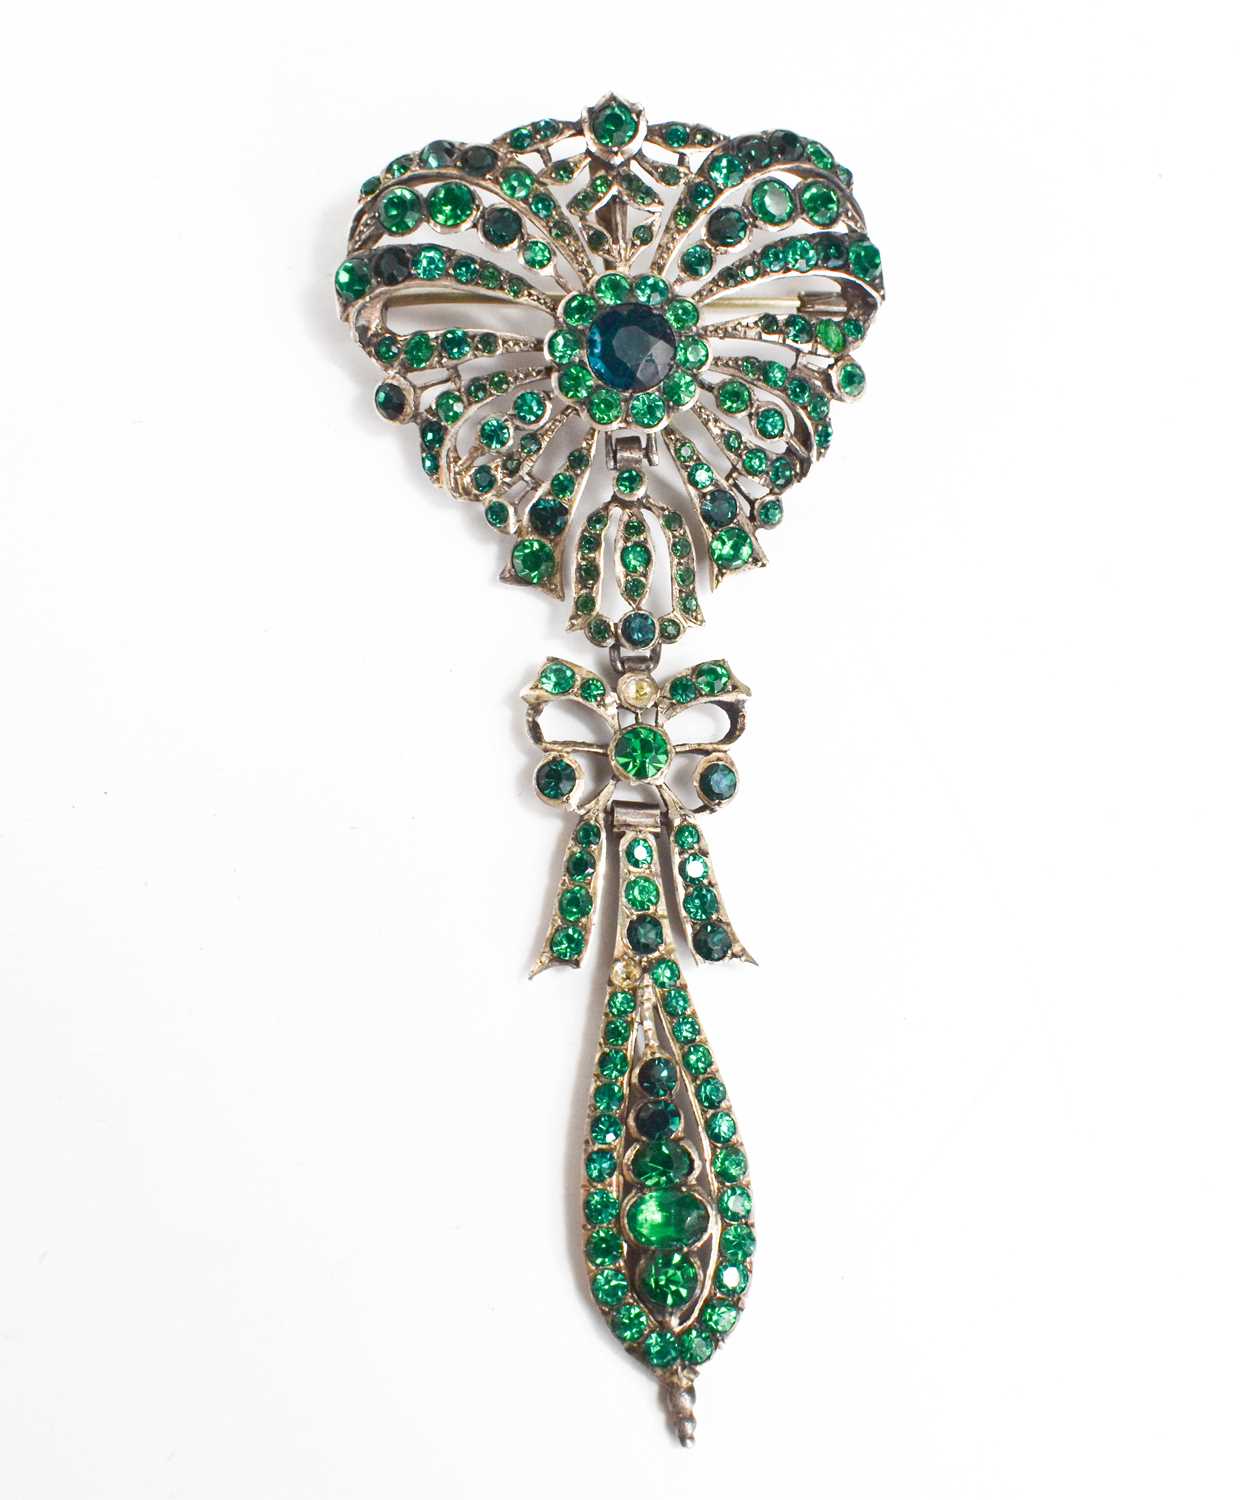 A 19th century French silver and green paste articulated bodice brooch pin, the brooch having a